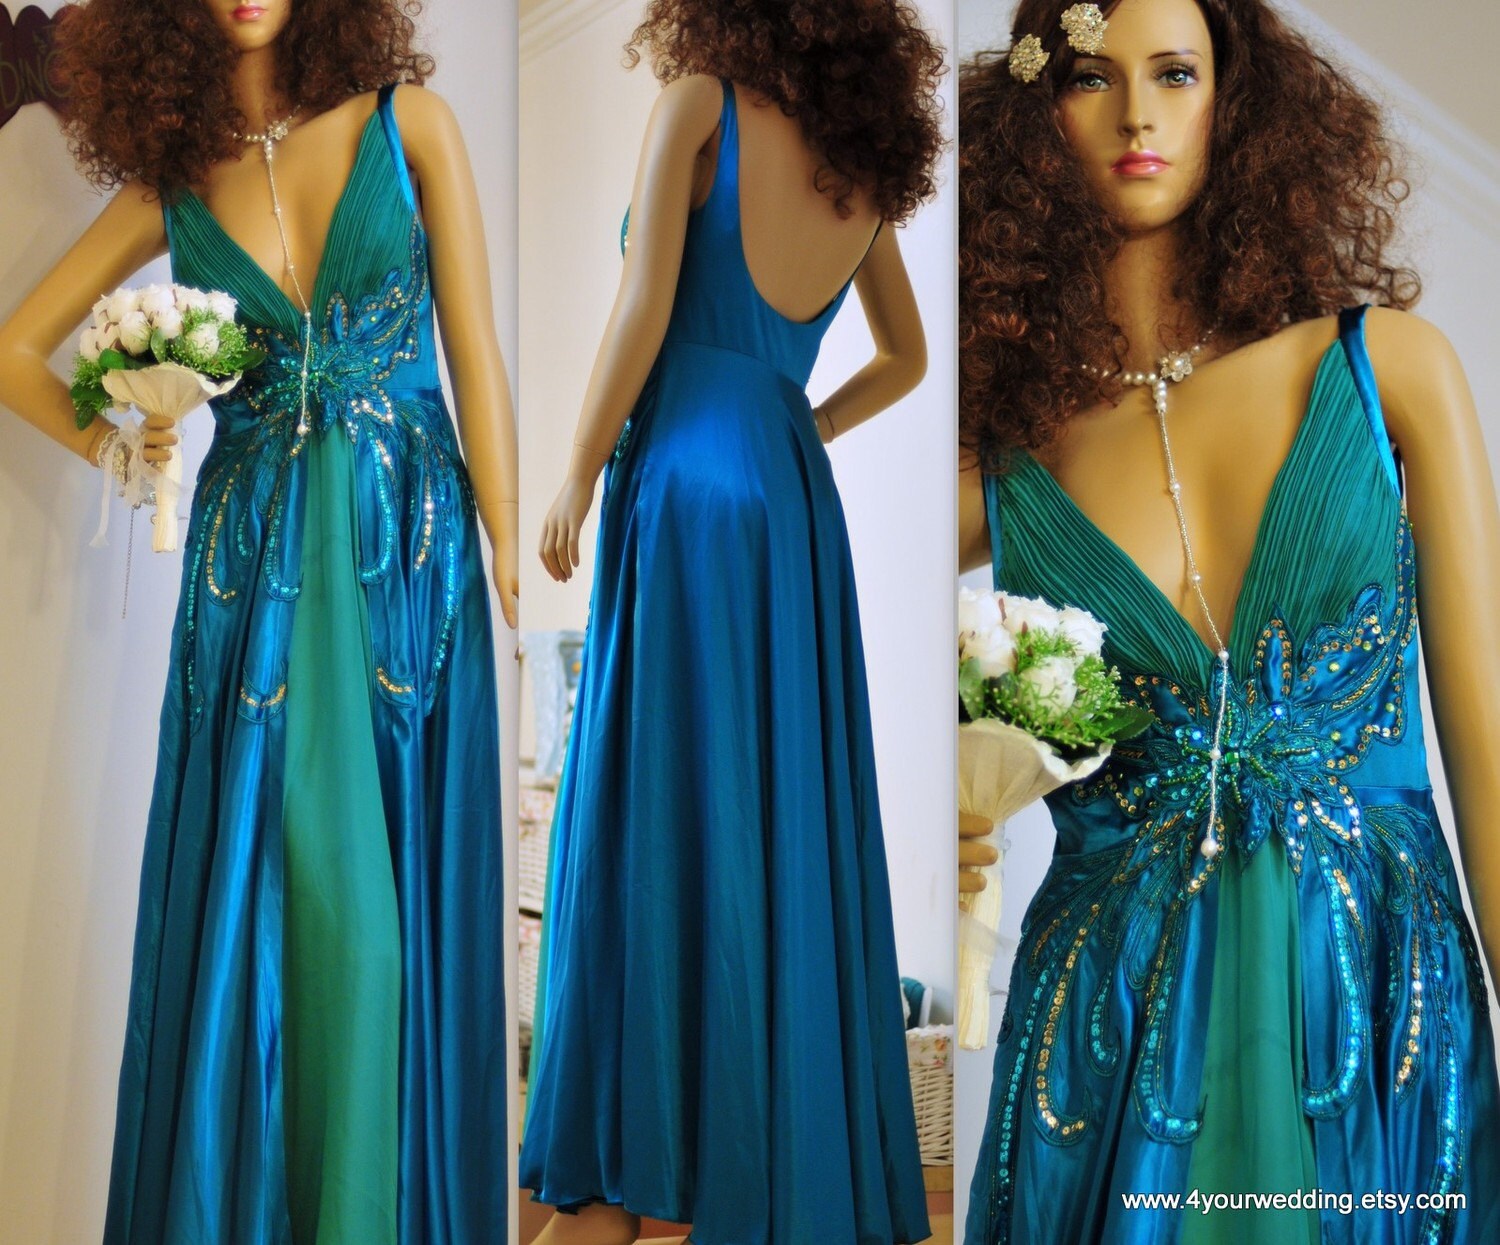 Prom Dress---Graduation Party---Formal Dress---Valentine---Sweet Heart---Peacock Green---Free shipping USA